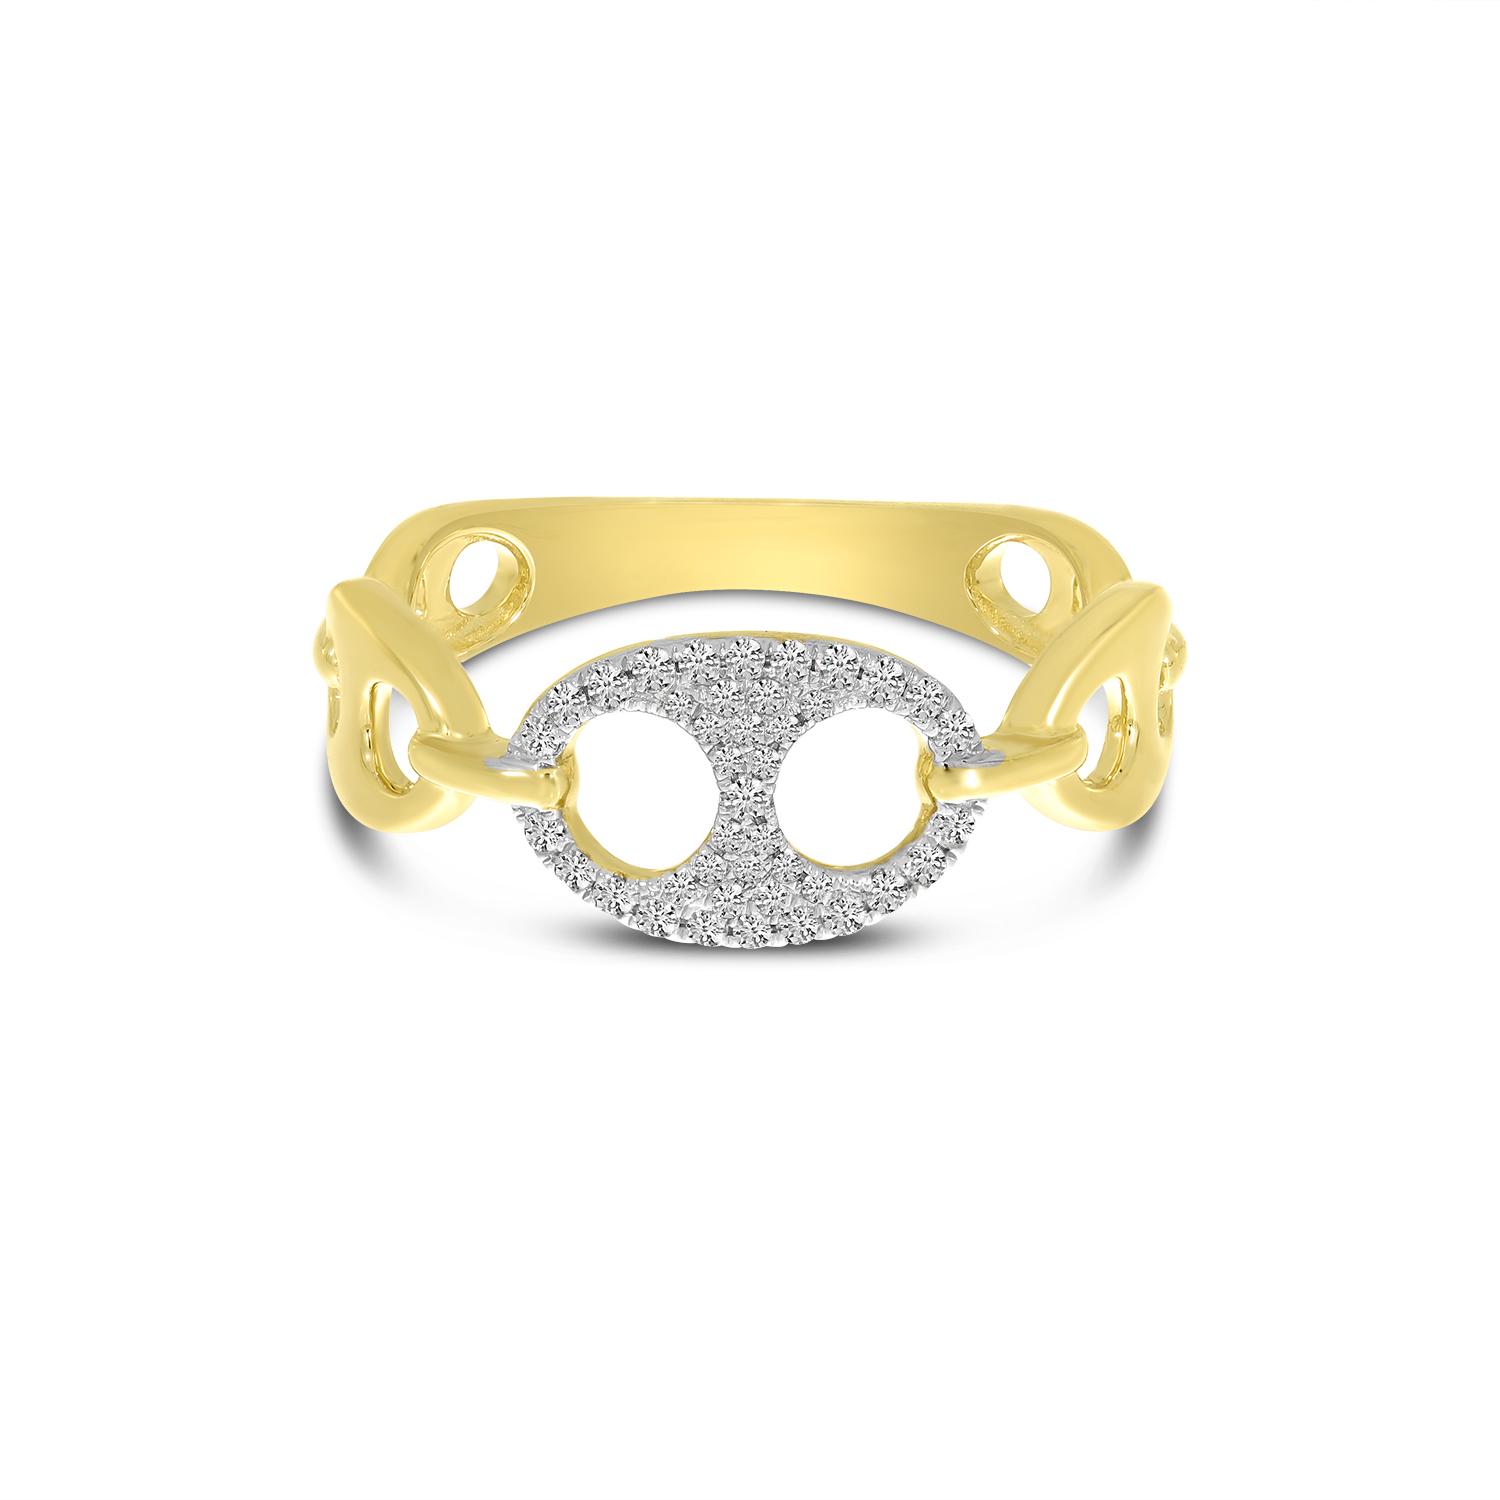 14K Yellow Gold Diamond Double Link Ring